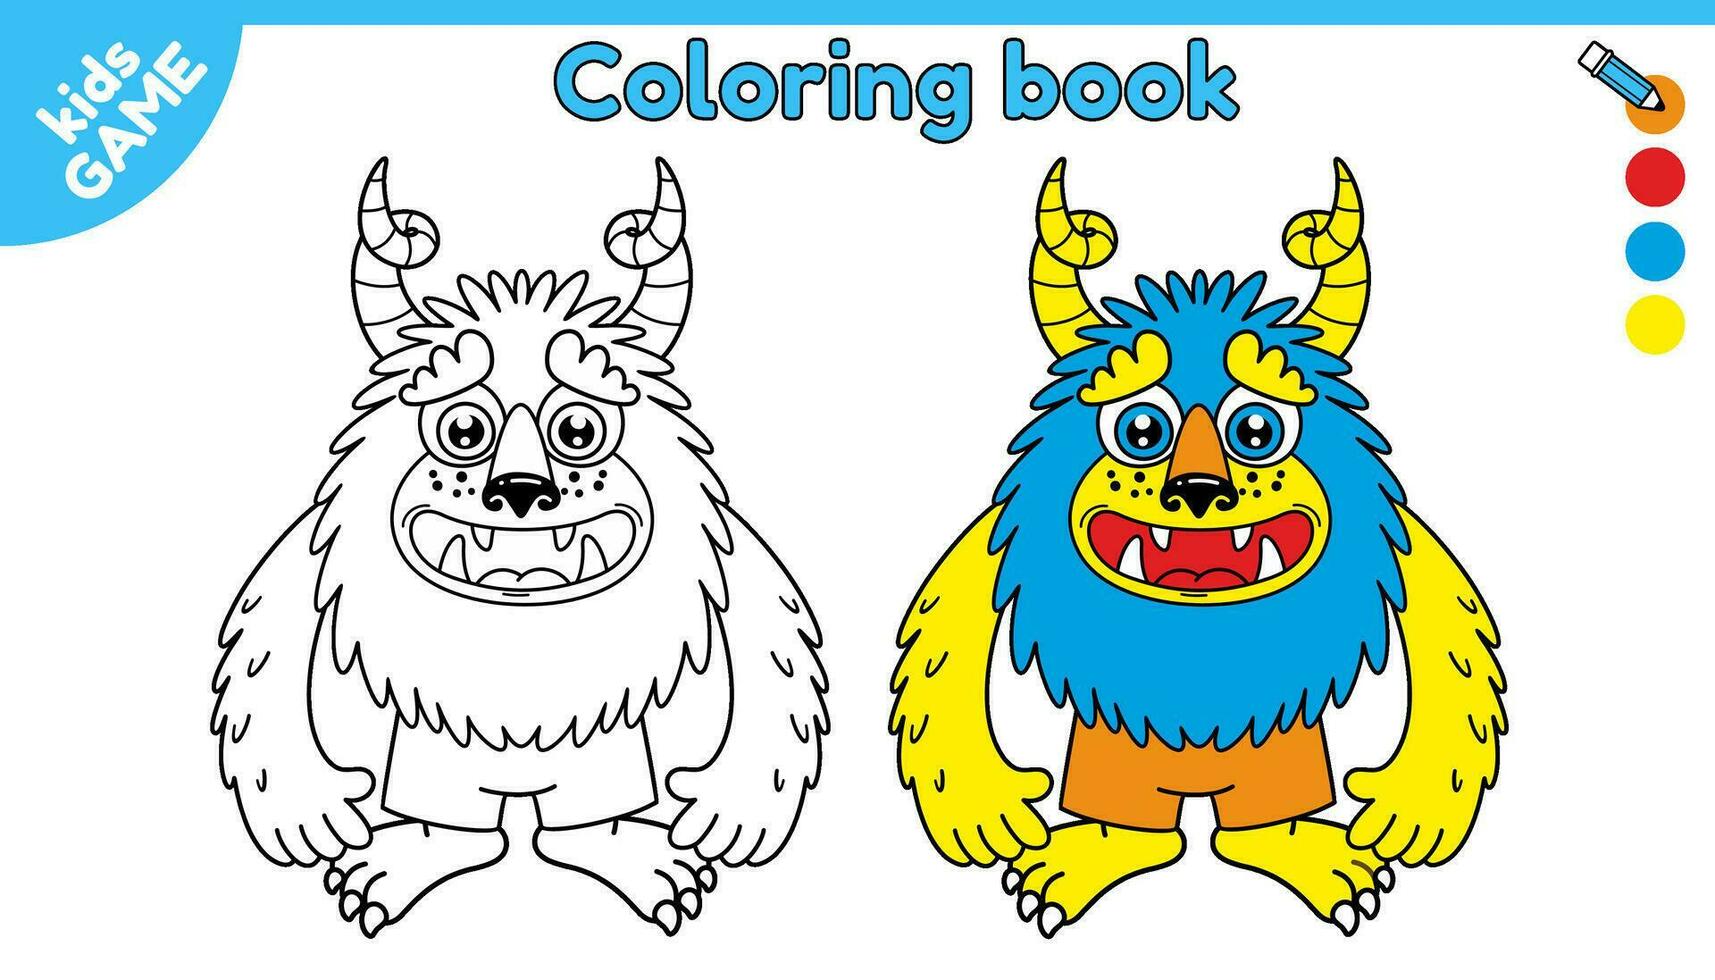 Page of coloring book for kids. Outline and color cartoon monster. Activity for preschool and school children. Painting task for child. Paint cute contour mutant. Vector black and white illustration.